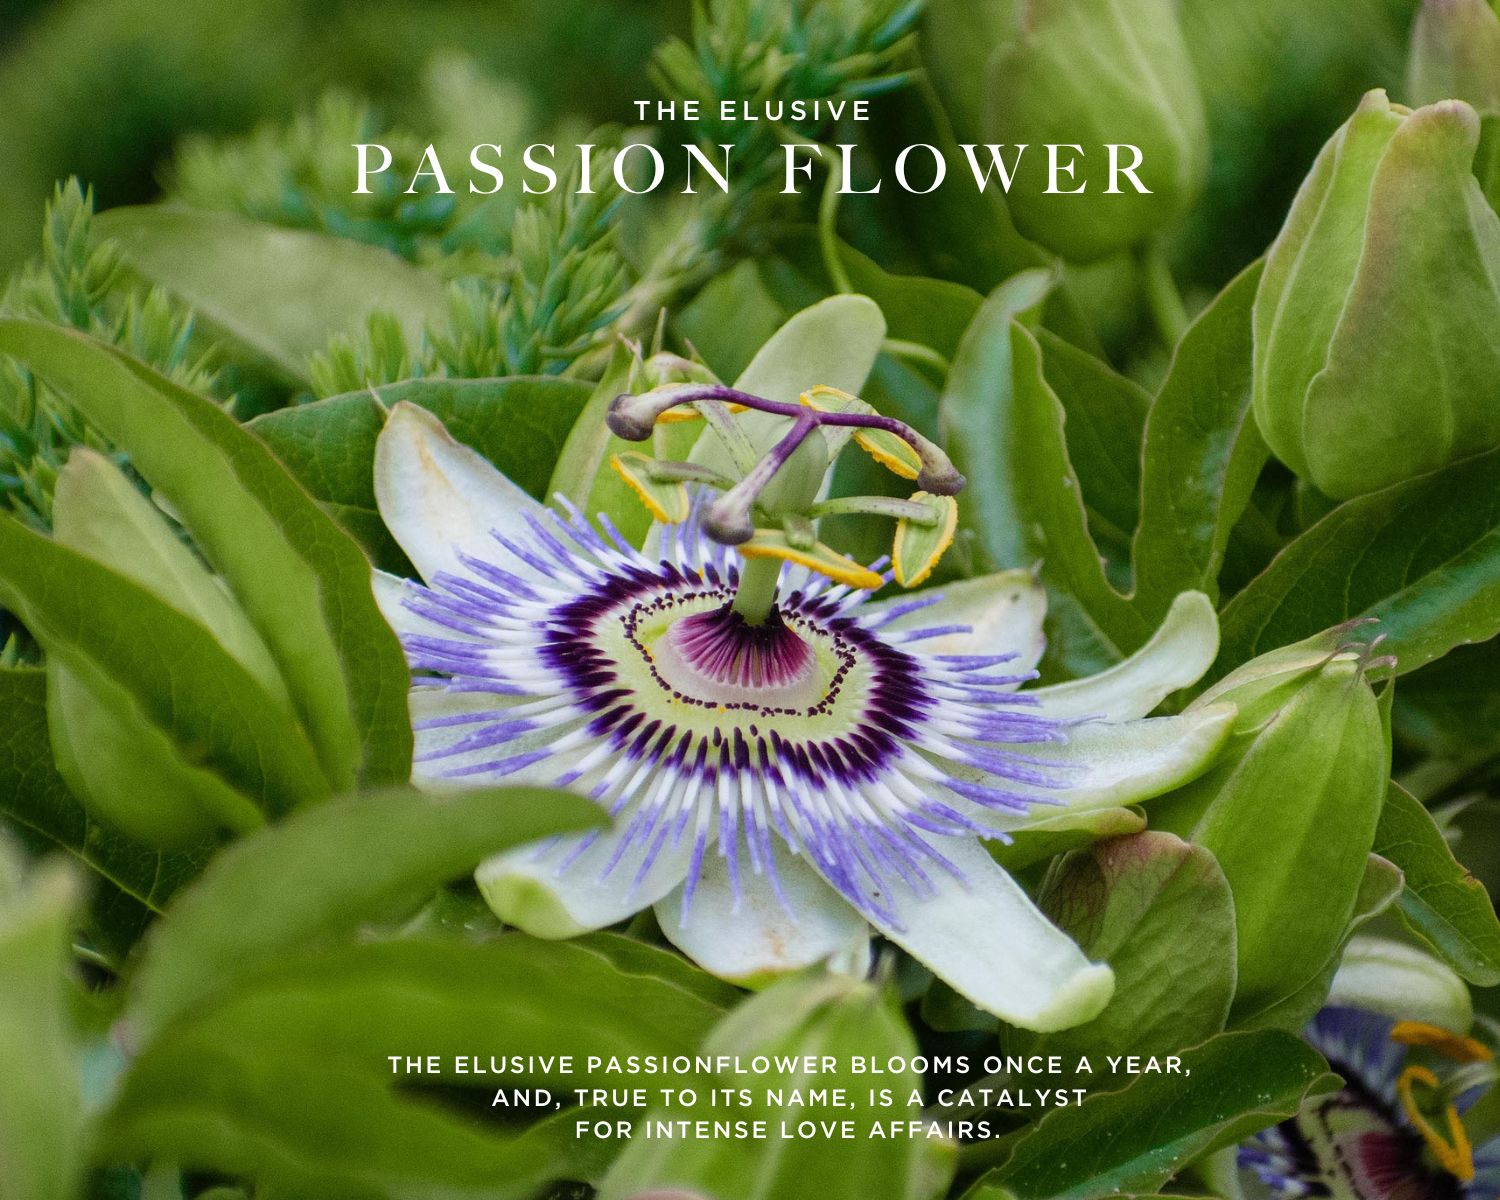 Caswell-Massey Elixir of Love Eau de Toilette: image showing one of the scent notes, the elusive passionflower in bloom